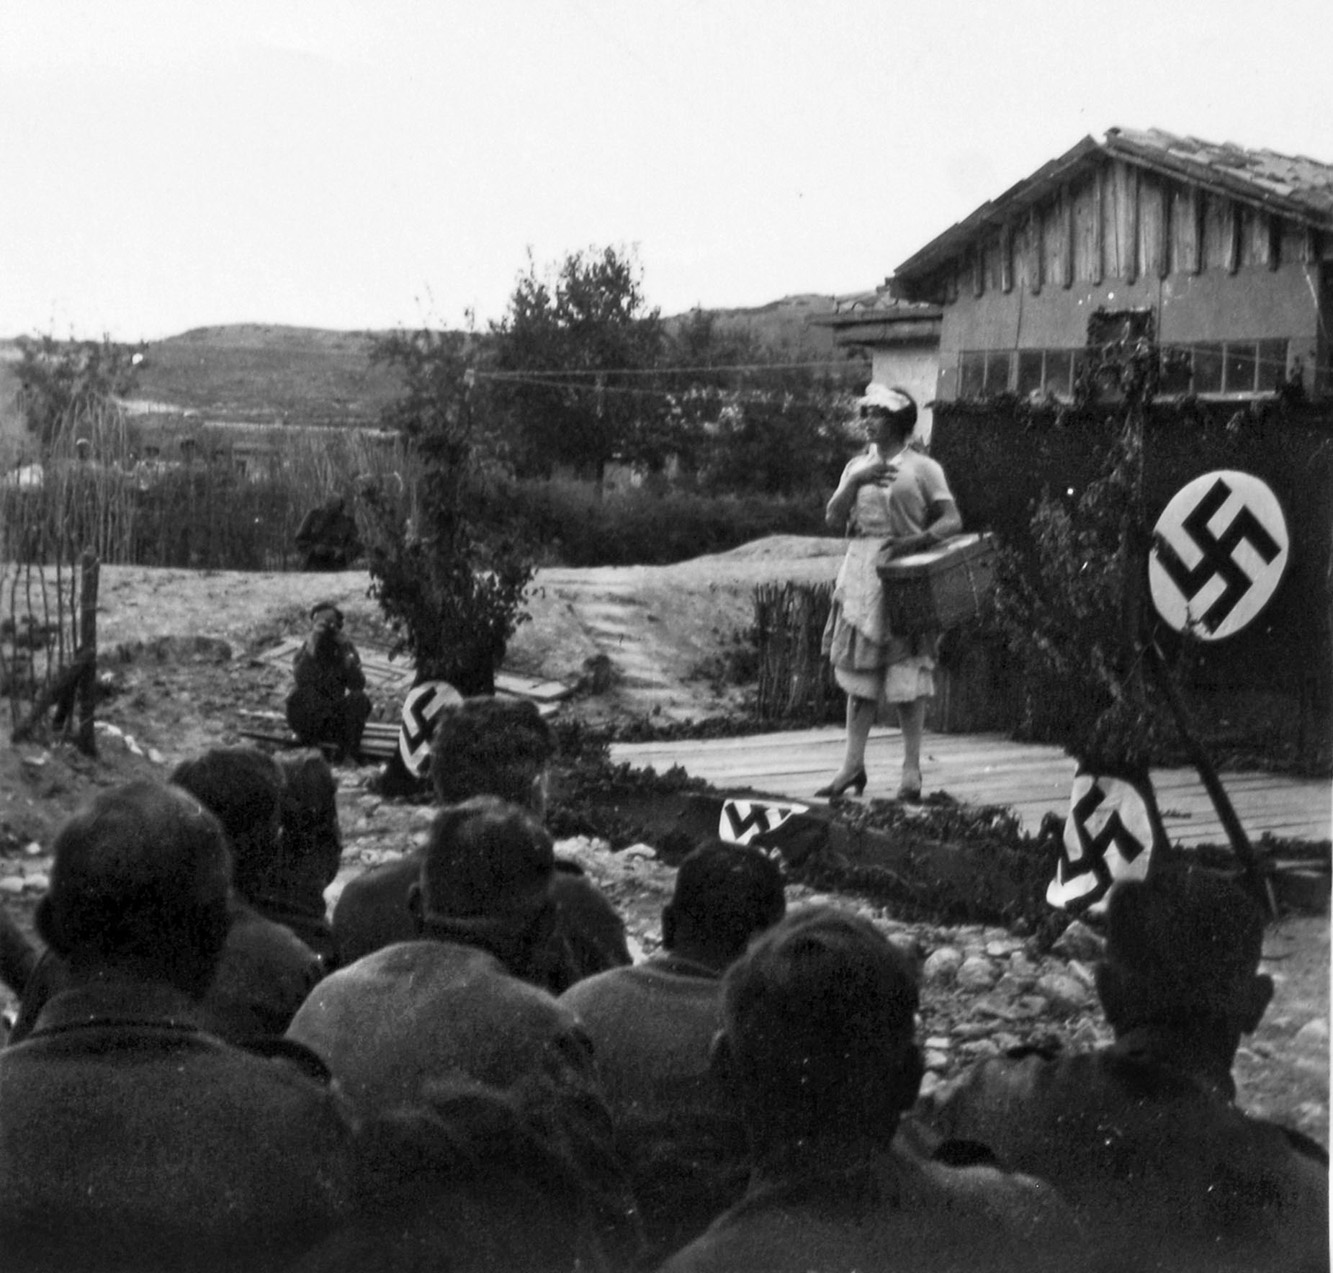 Appearing on the Eastern Front, a member of a traveling troupe of entertainers (the German version of the USO) performs on a makeshift, swastika-decorated stage. The performer is a male, not quite a female impersonator, but rather a staple of the humorous fare to which the troops were accustomed.